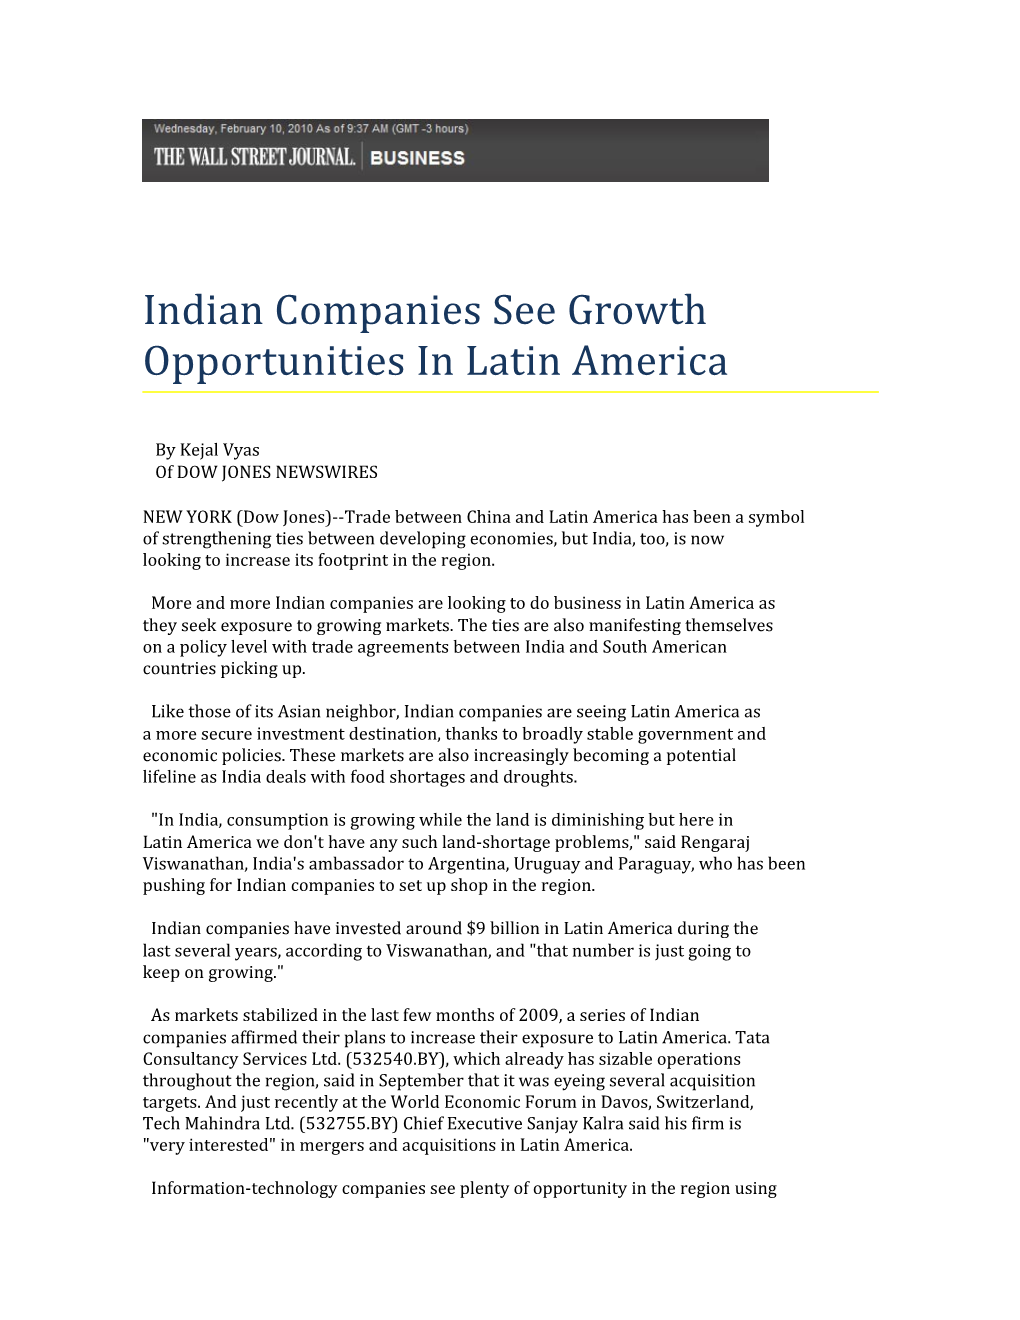 Indian Companies See Growth Opportunities in Latin America